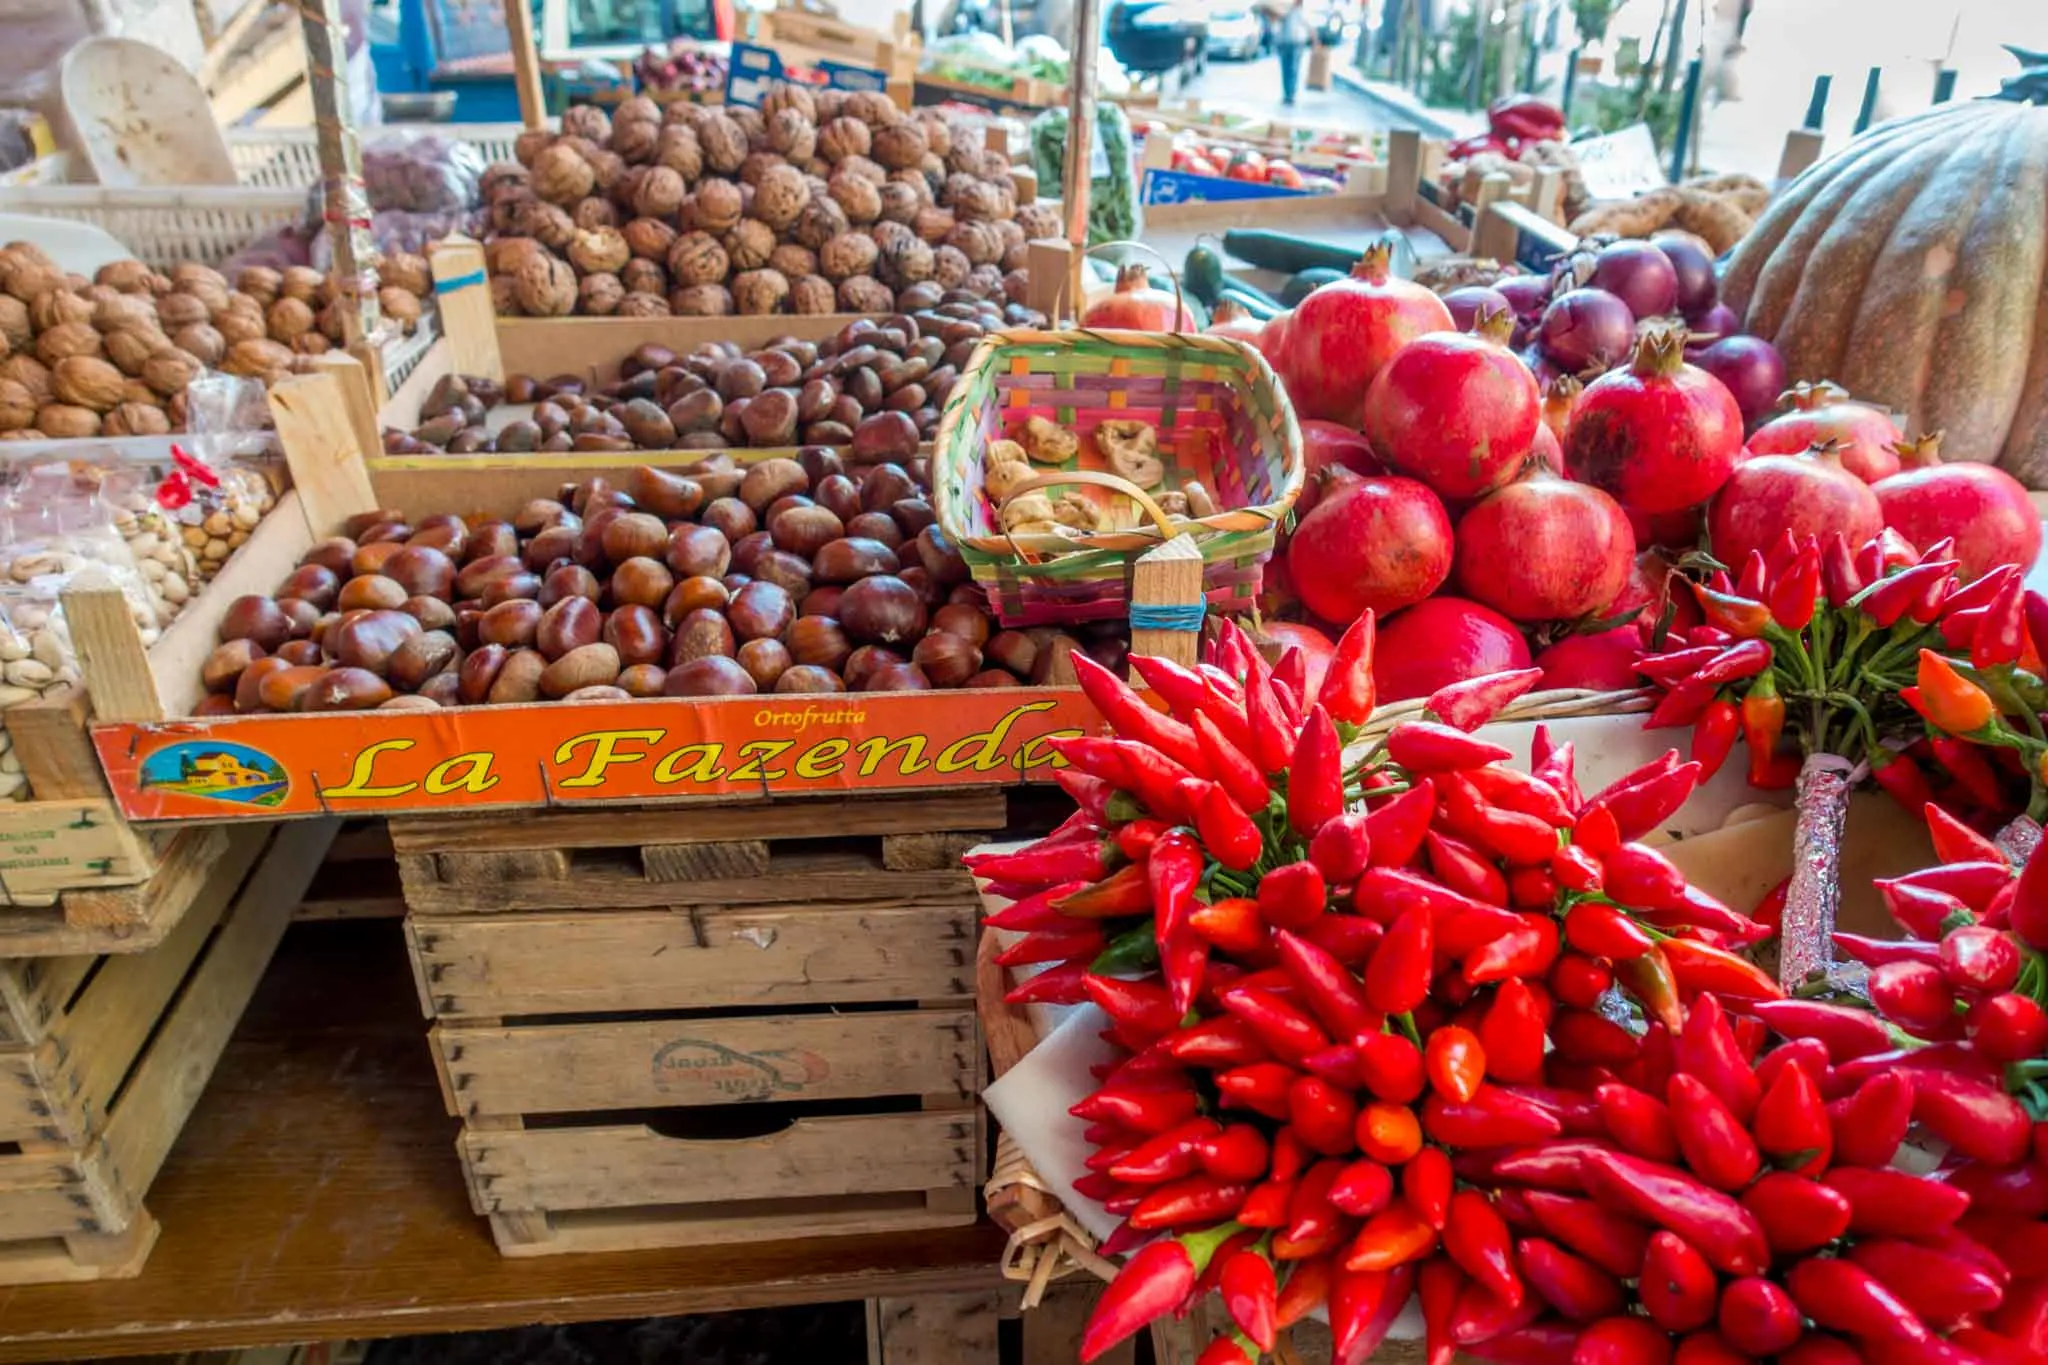 Peppers and nuts displayed for sale